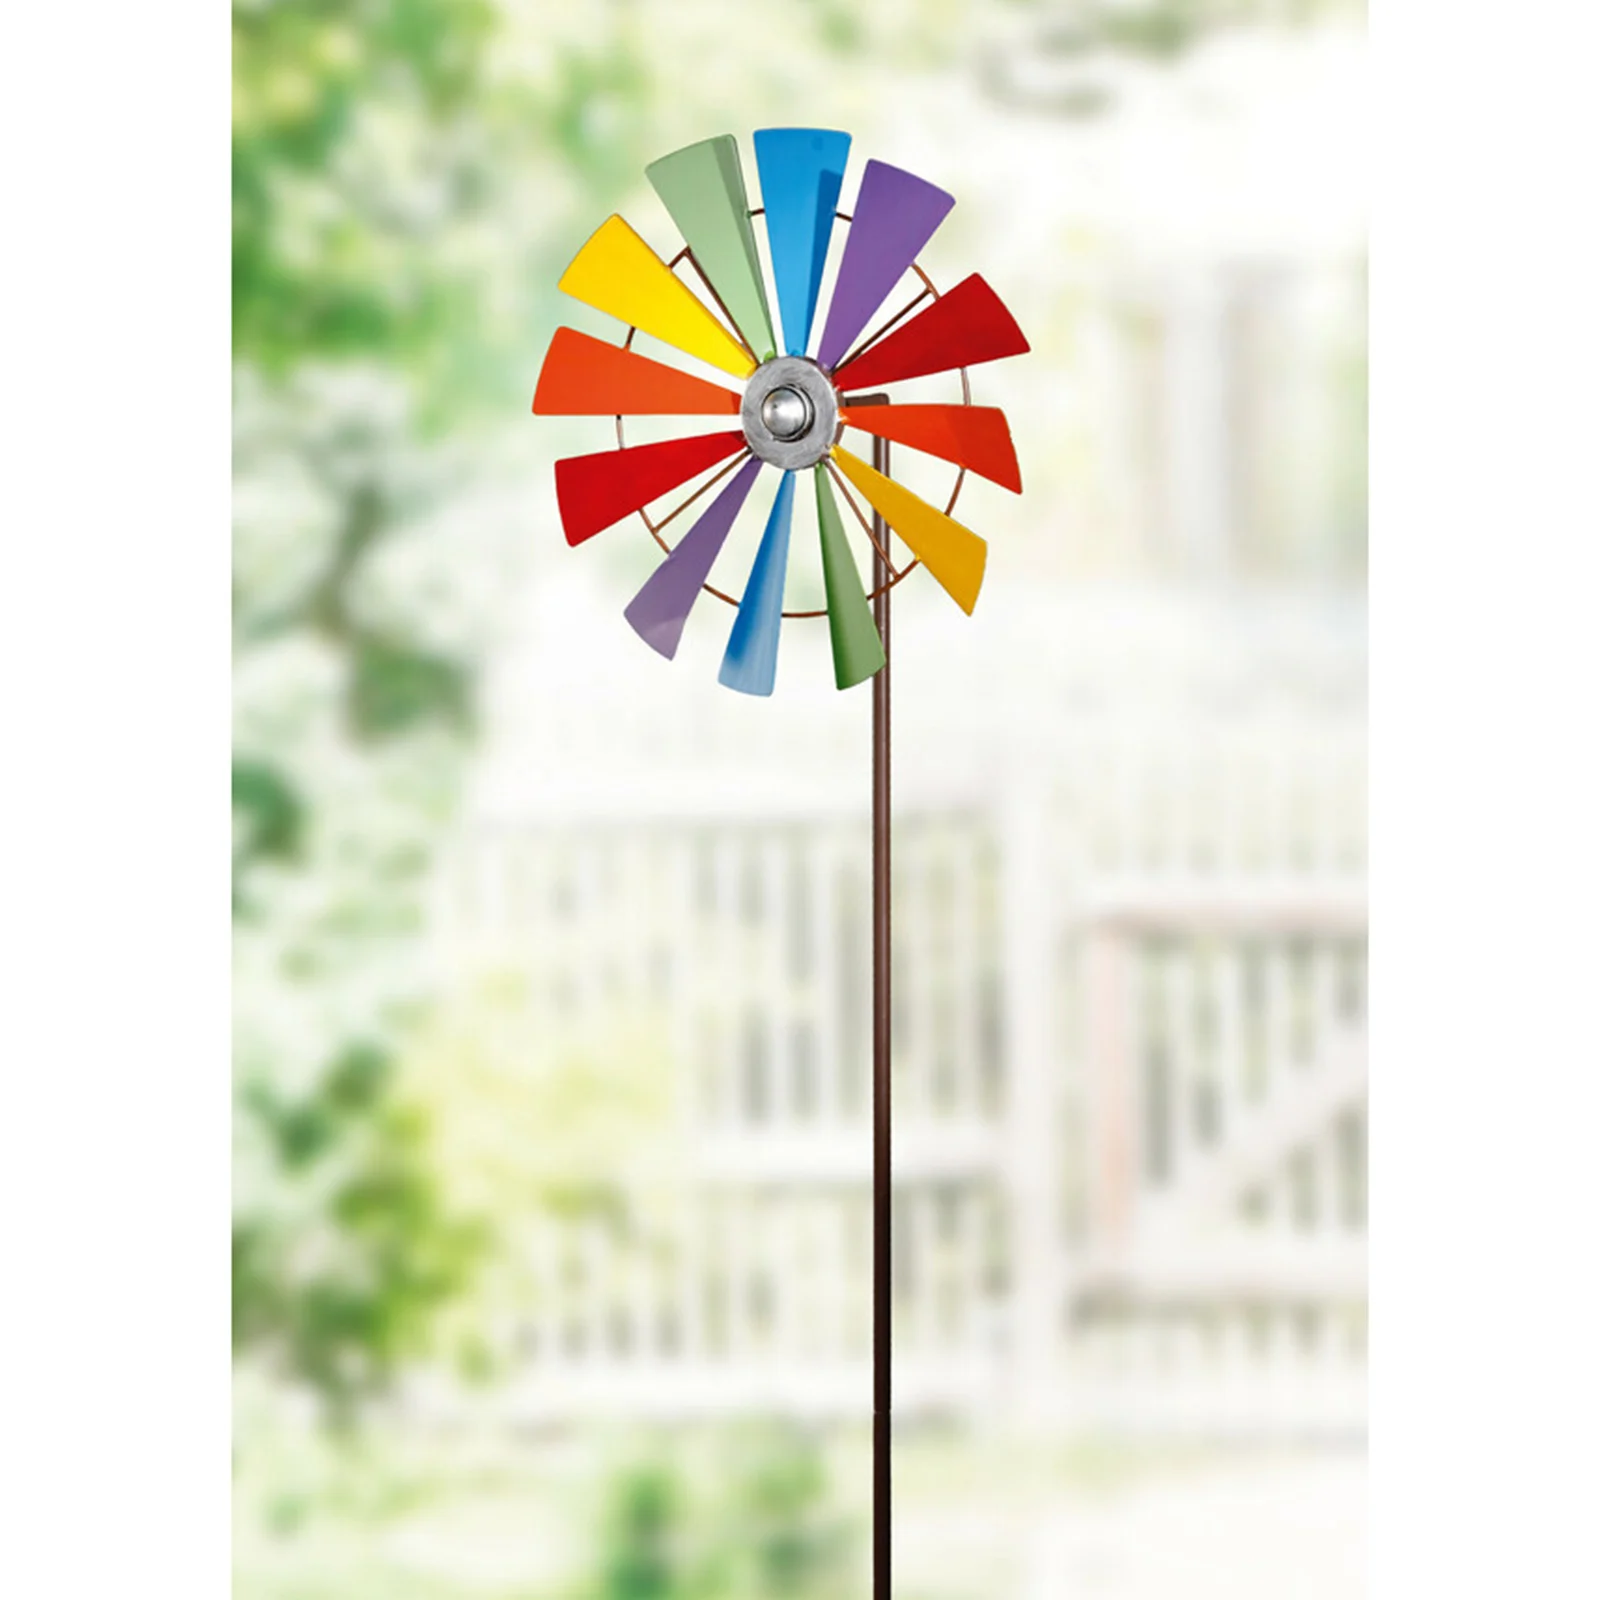 Rainbow Colors Vitality Durable Pinwheel Windmill Toys Ornaments for Yard Decor Lawn Decorative Garden Stakes Whimsical